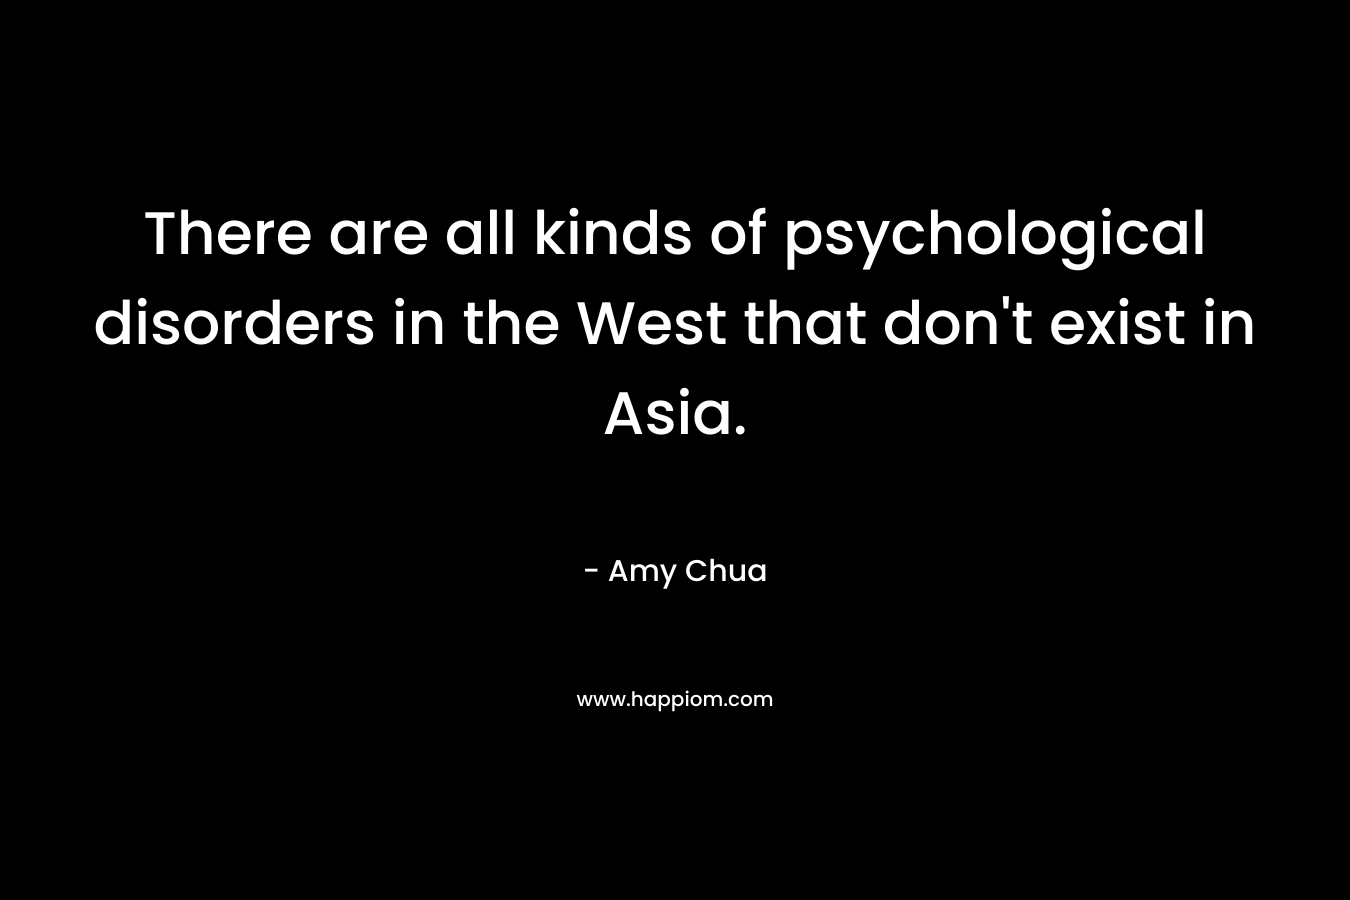 There are all kinds of psychological disorders in the West that don't exist in Asia.